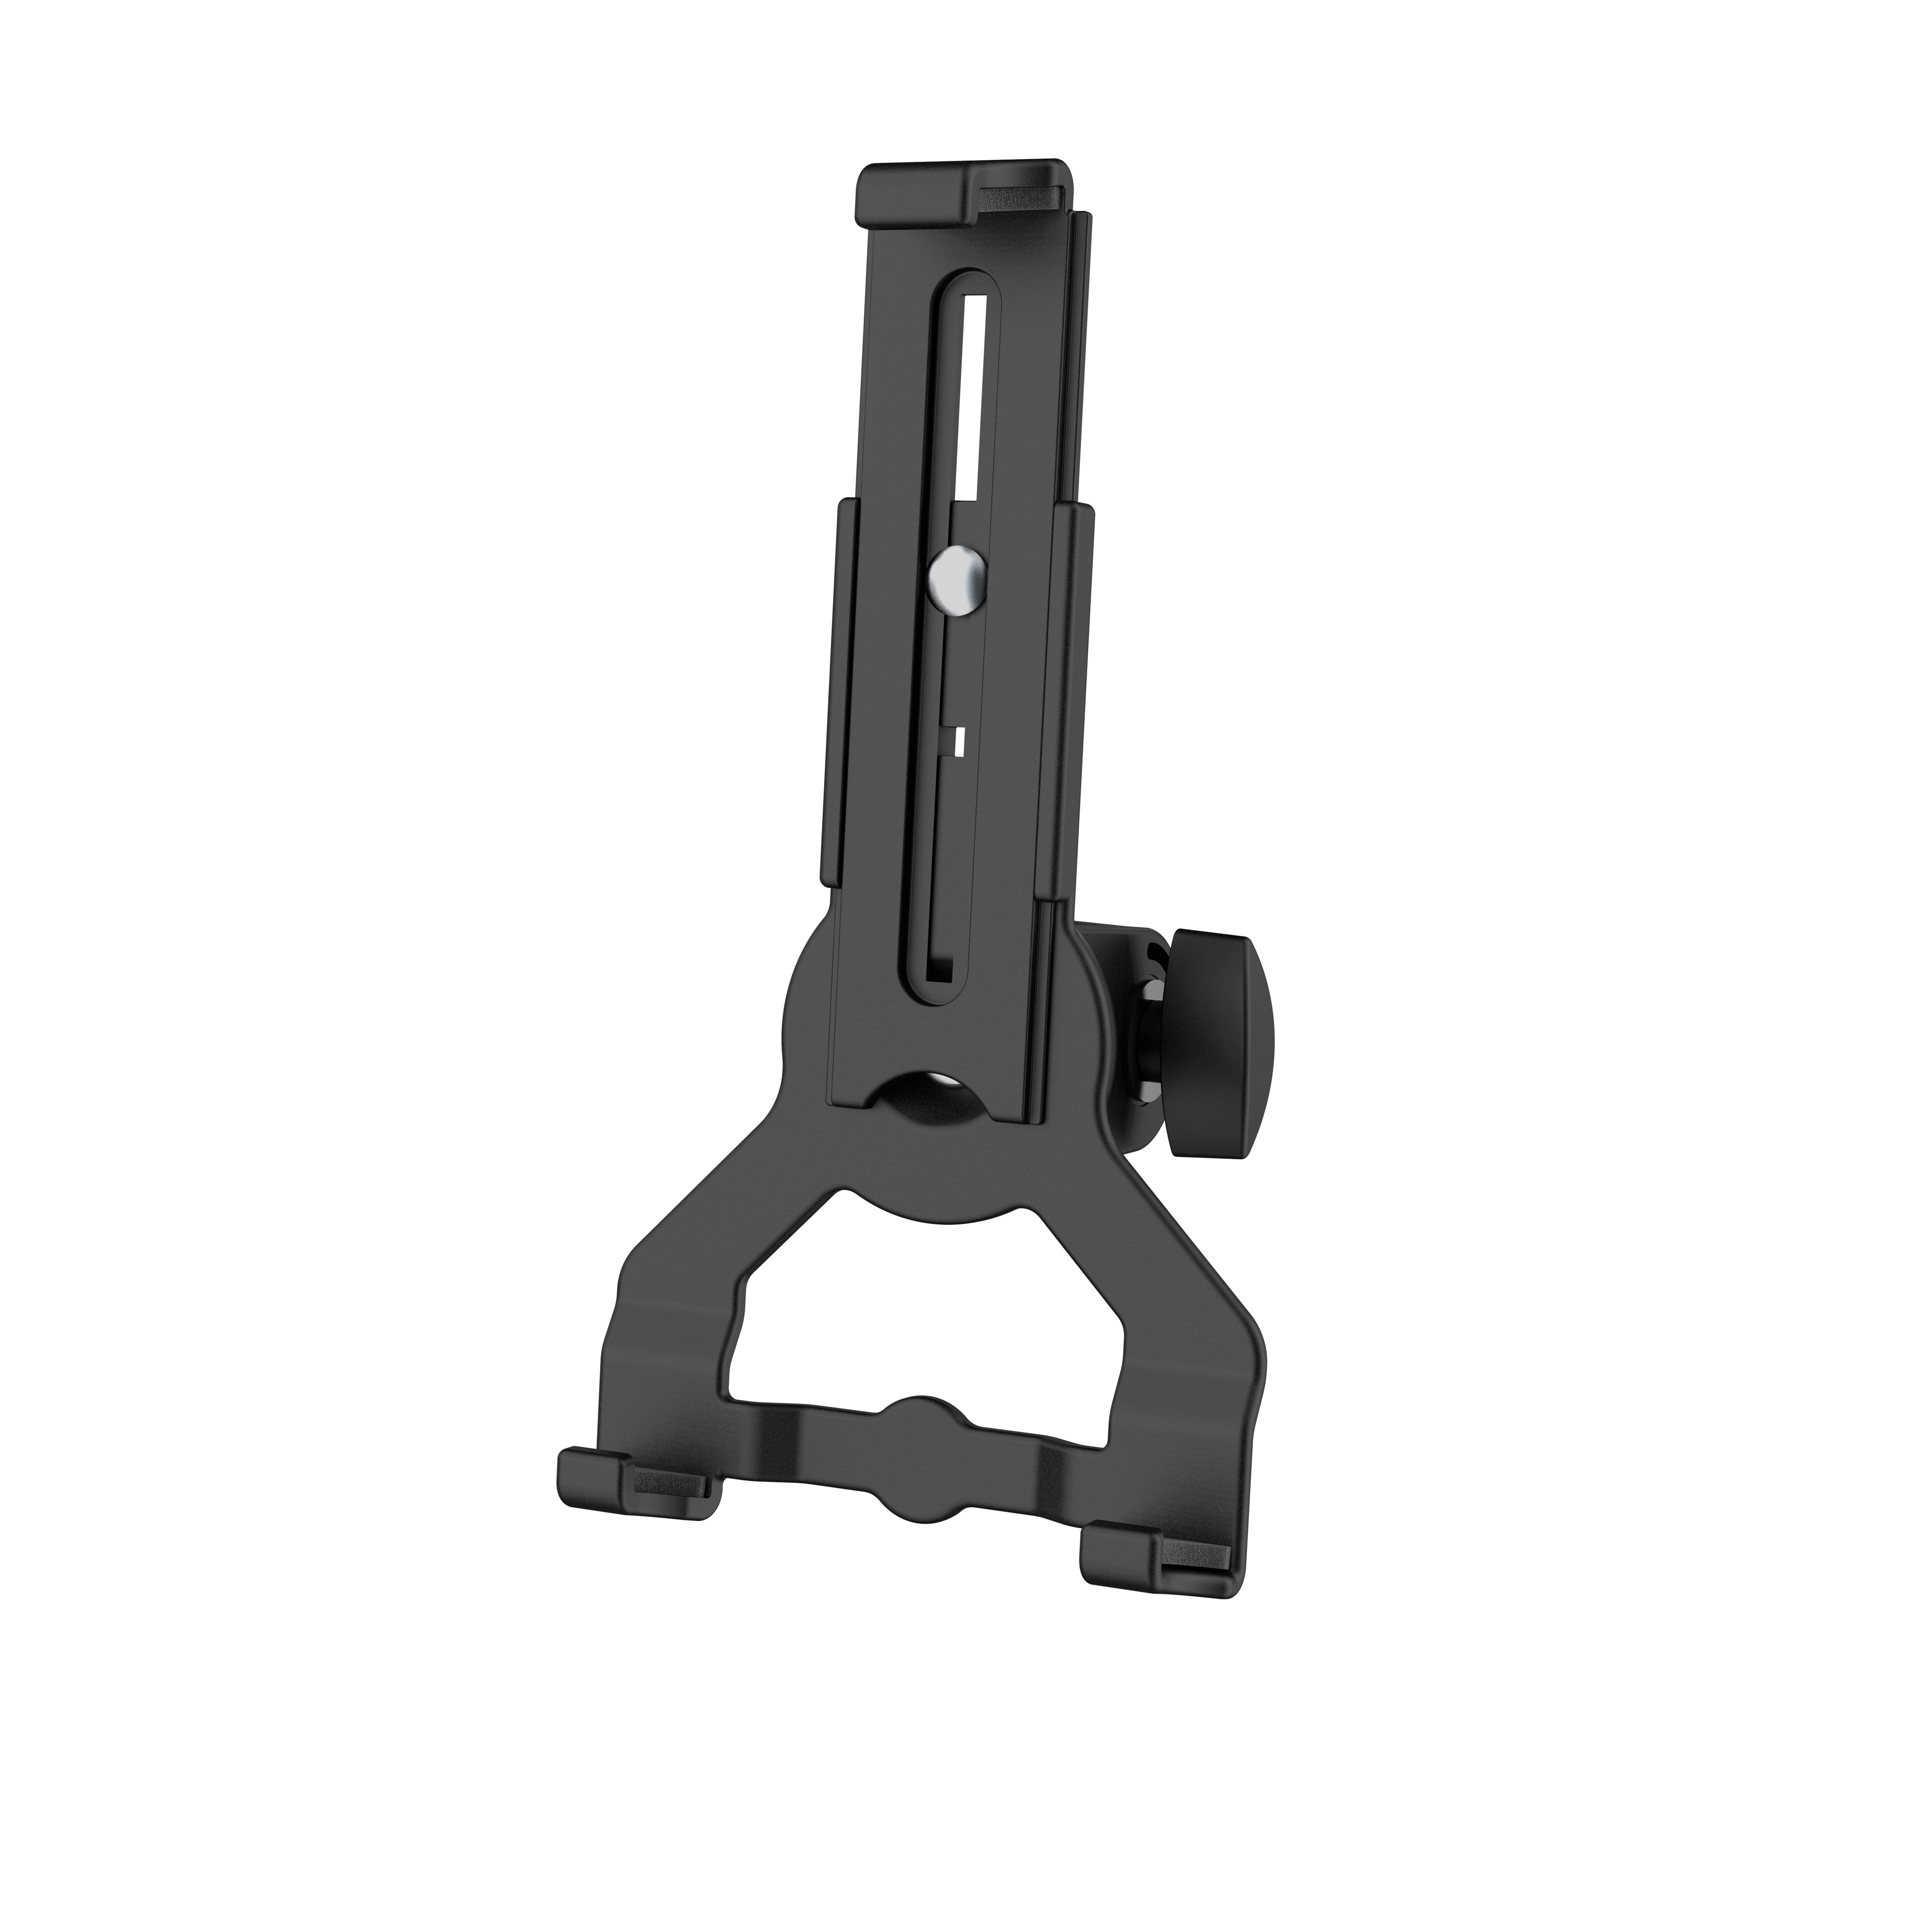 K&M 19766 Tablet PC stand holder »Biobased«